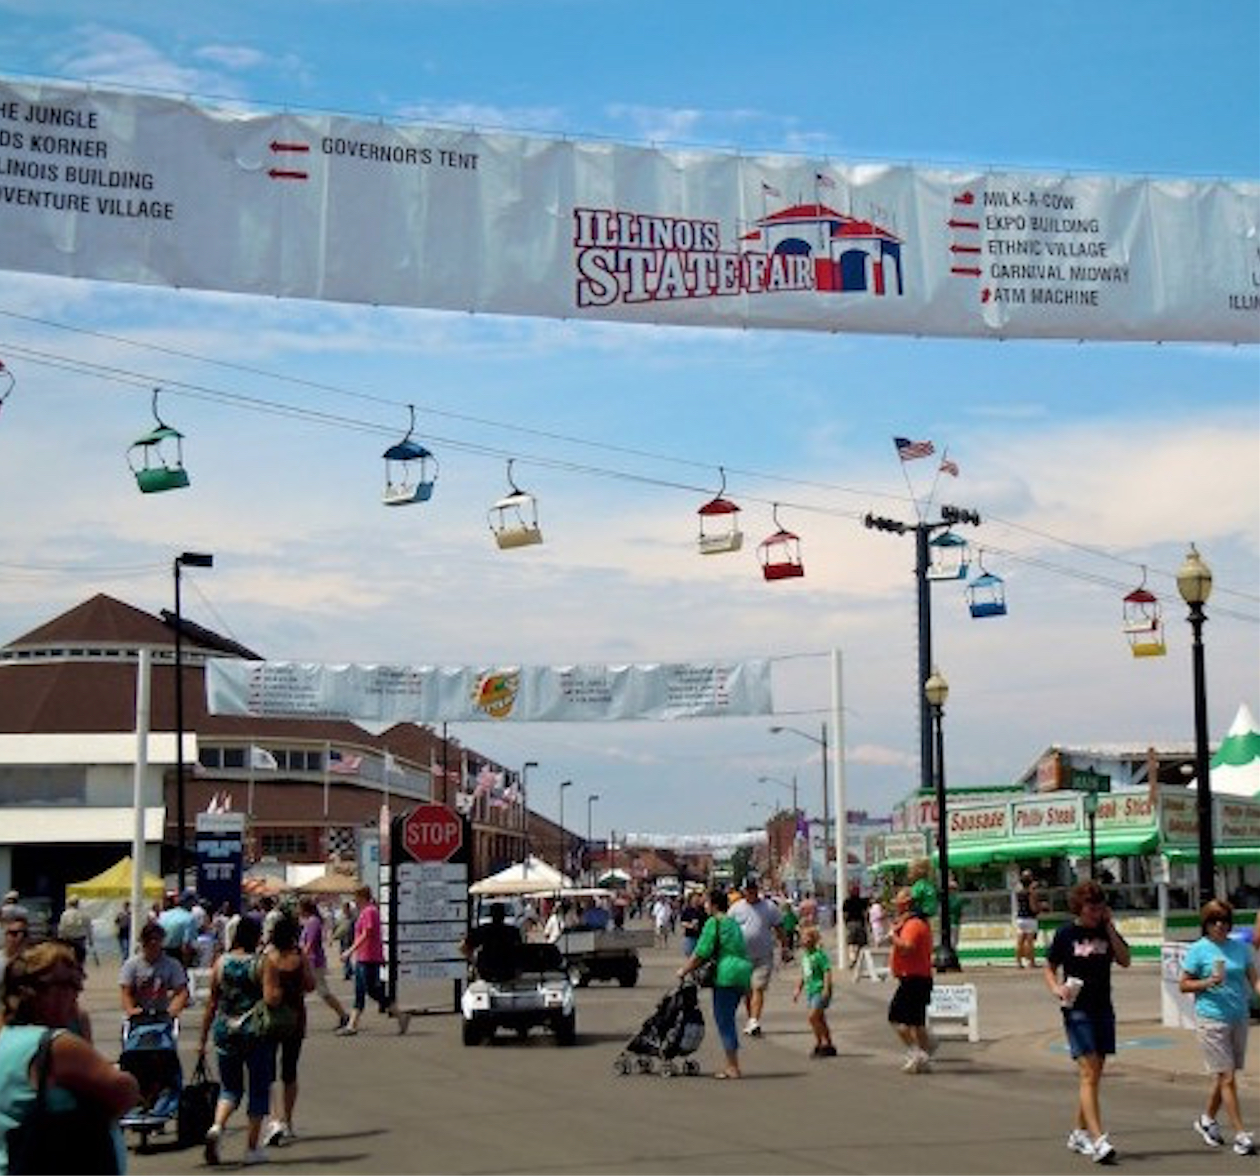 New vision for Illinois State Fair aimed at attracting younger